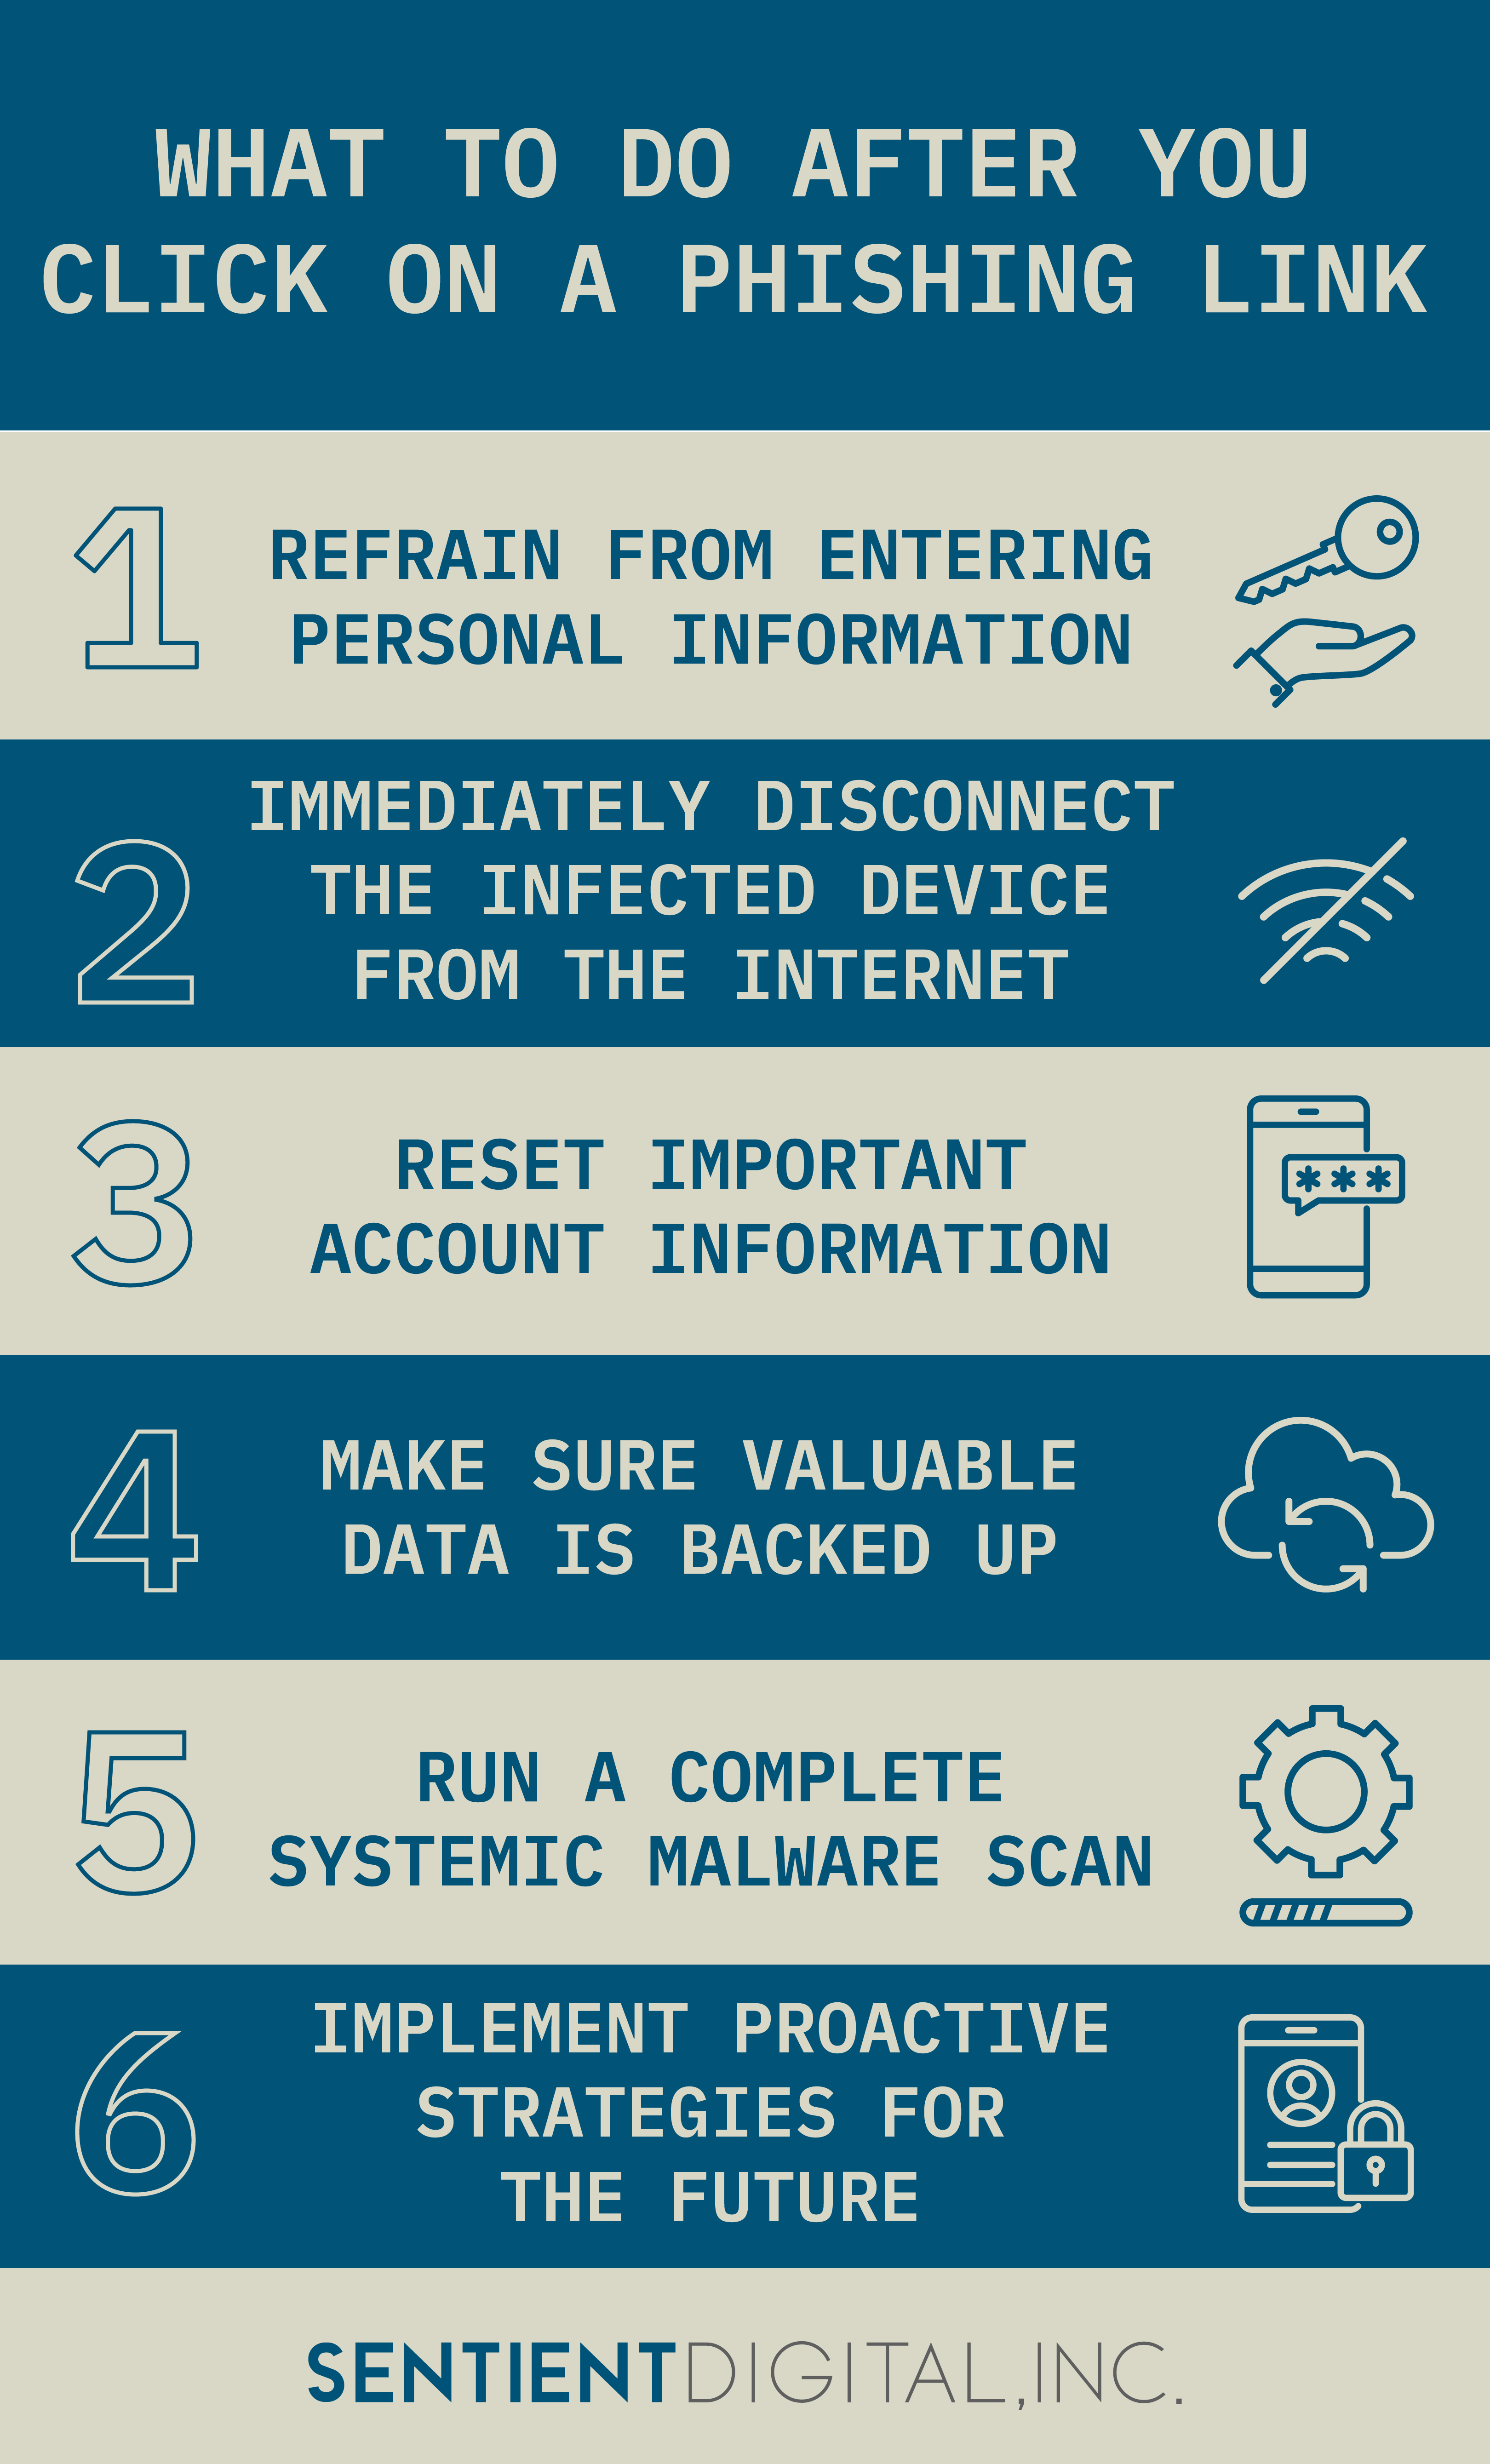 Check out our infographic or keep reading for 6 steps detailing what to do after you click on a phishing link.